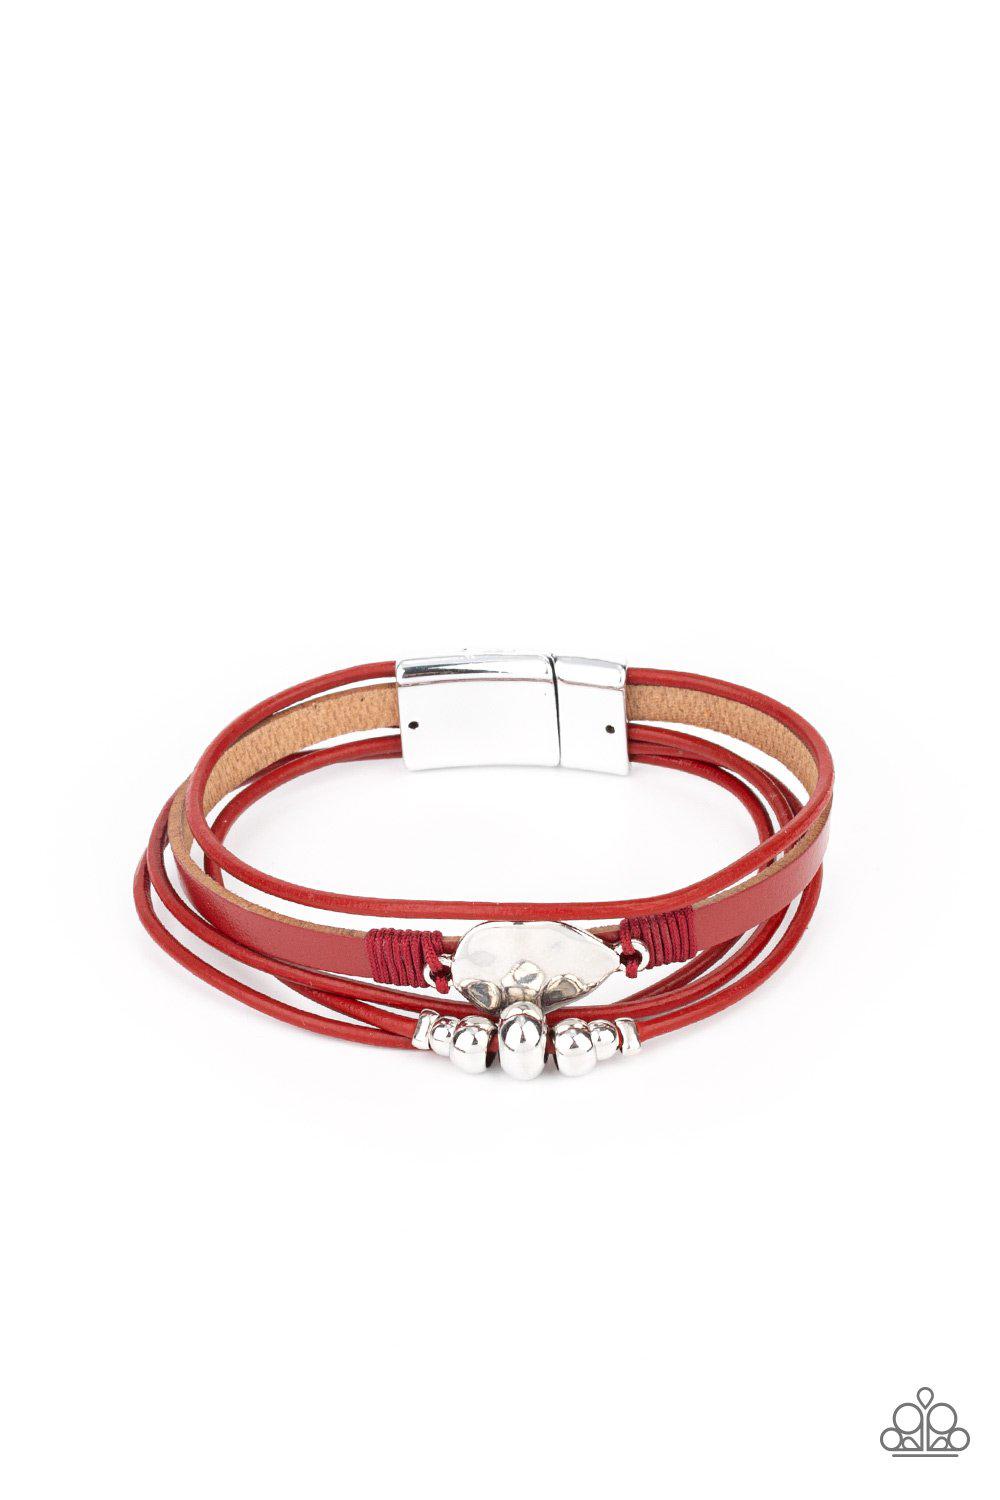 Tahoe Tourist Red Leather and Silver Magnetic Bracelet - Paparazzi  Accessories